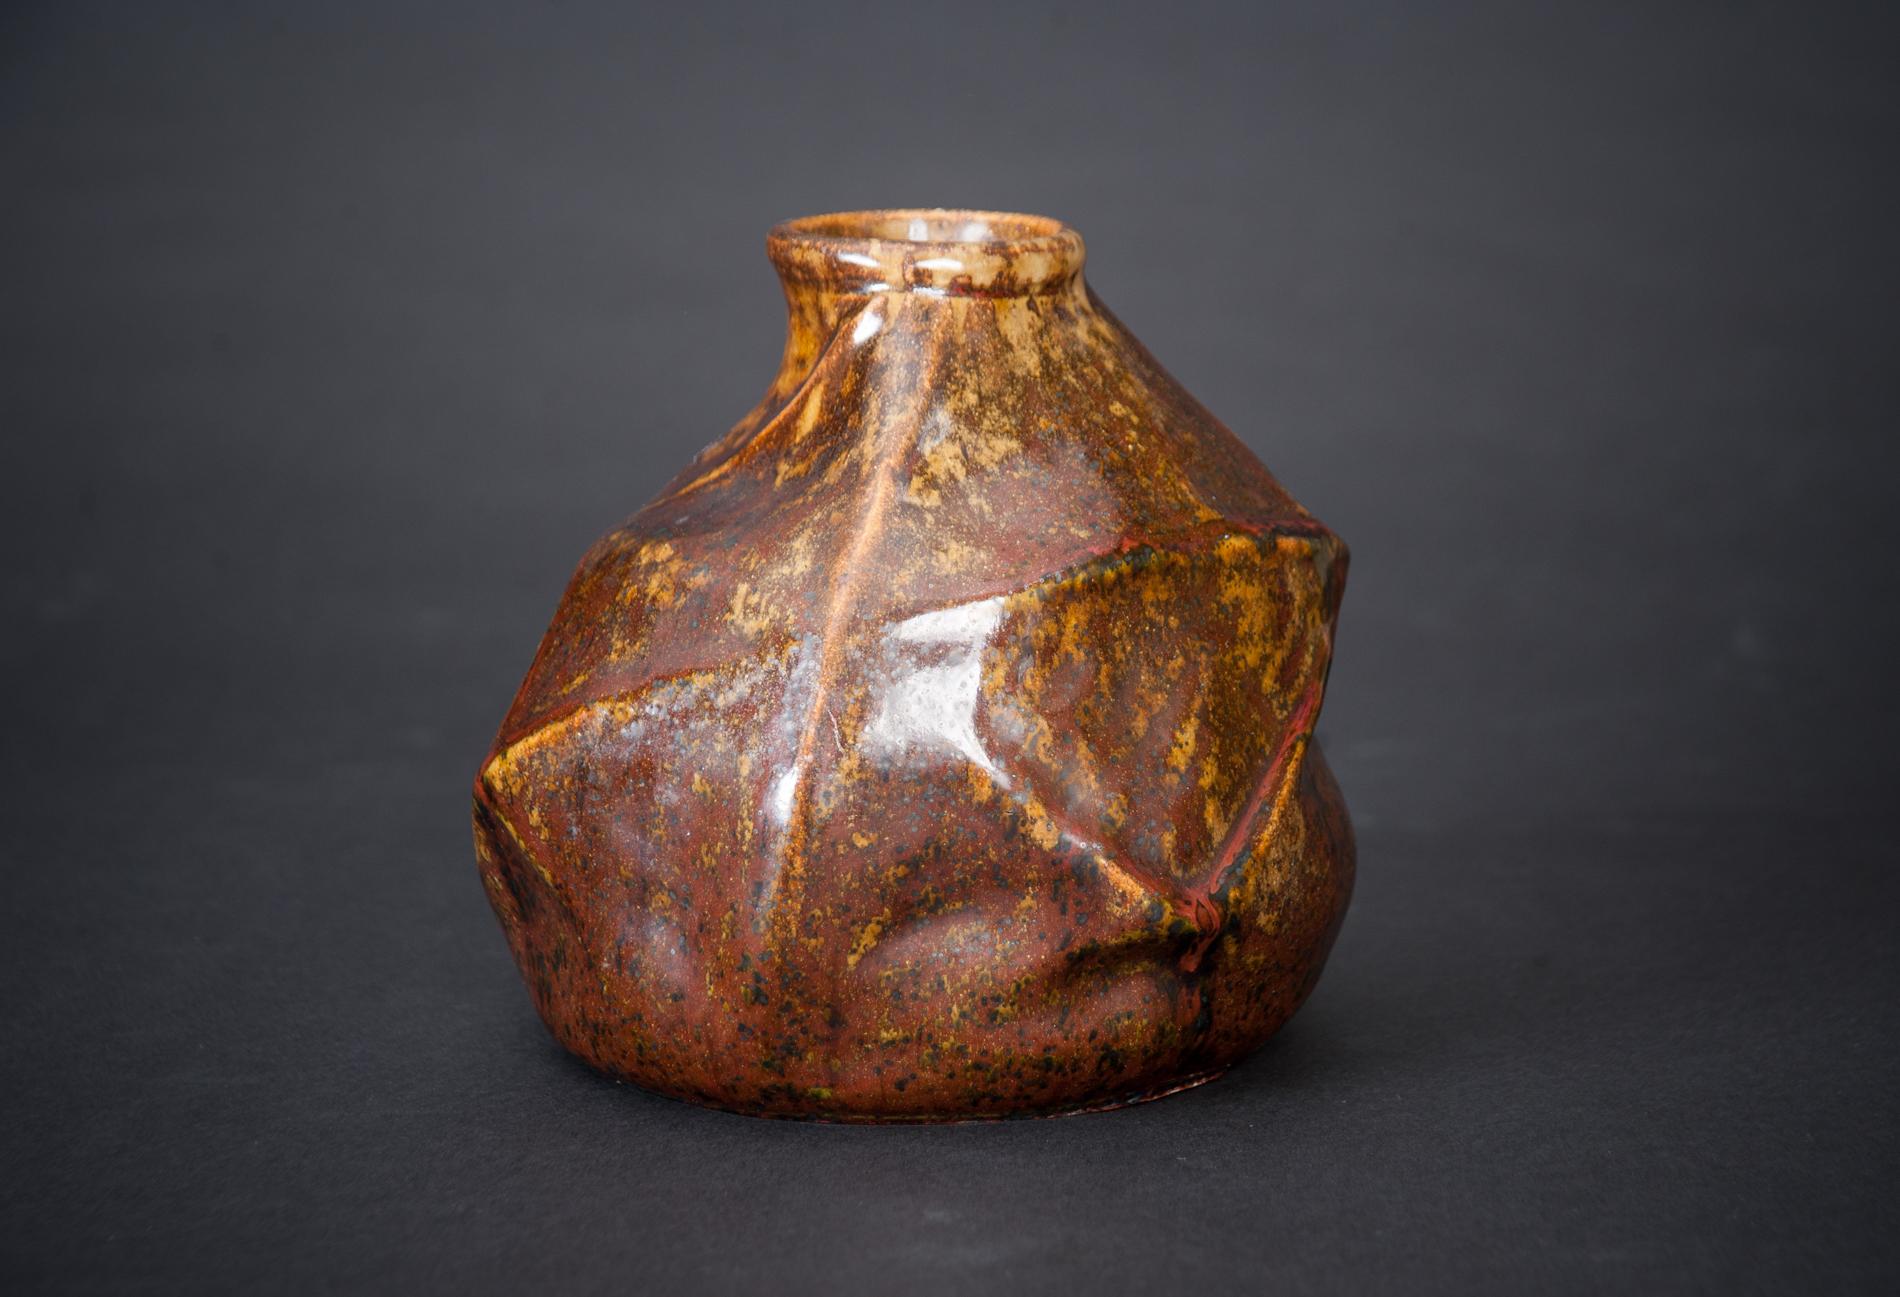 Much fuss is made about Dalpayrat’s signature red, but what many have not realized is that “Dalpayrat Red” refers not simply to a vivid red color glaze but just as often to a nuanced appearance of color resulting from the artist’s technical